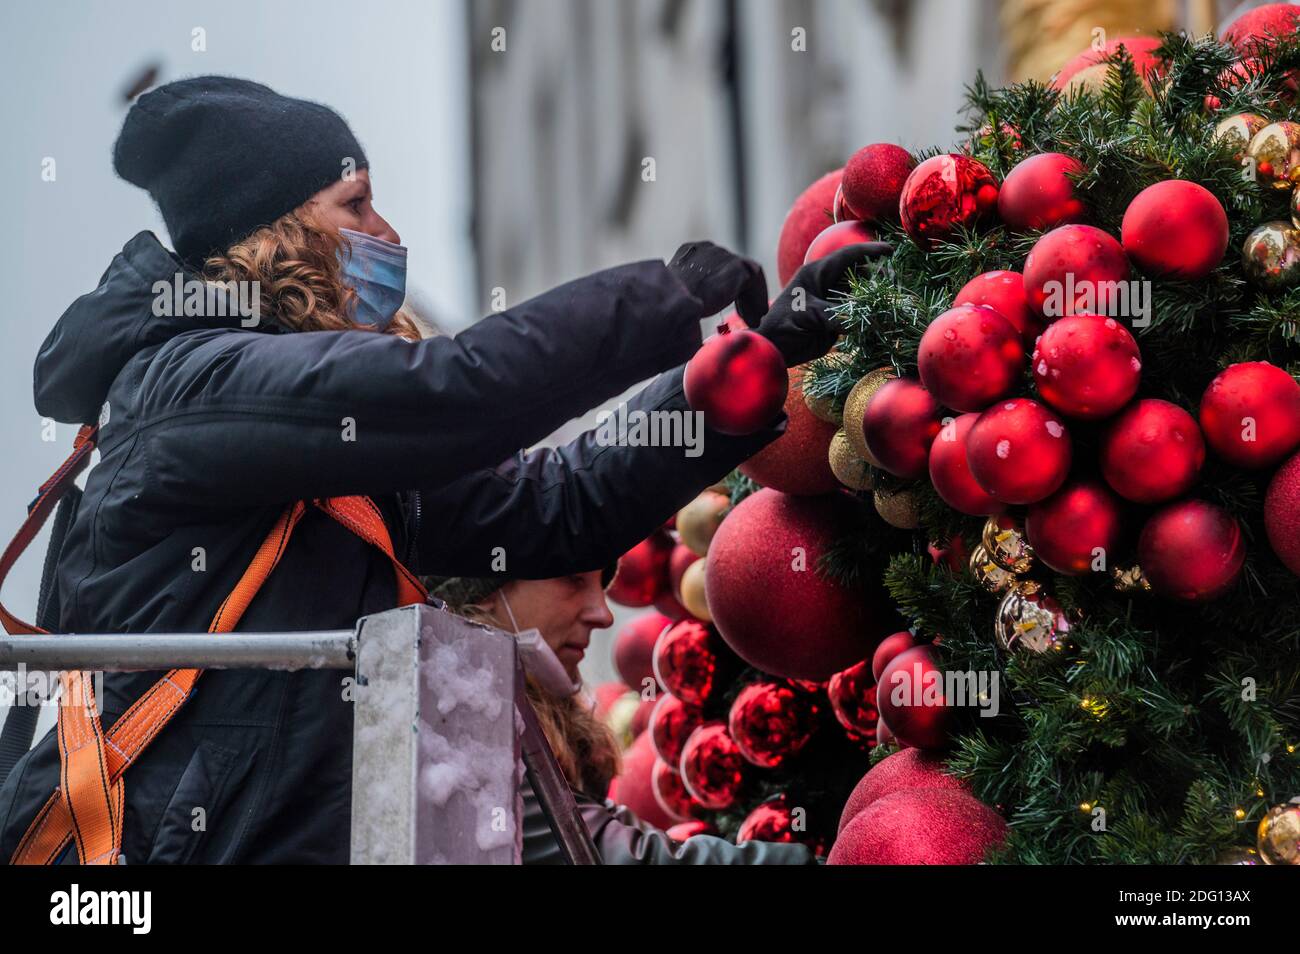 London, UK. 7th Dec, 2020. Final preparations are made to the Christmas decorations on the facade at Annabel's, Berkeley Square. Credit: Guy Bell/Alamy Live News Stock Photo